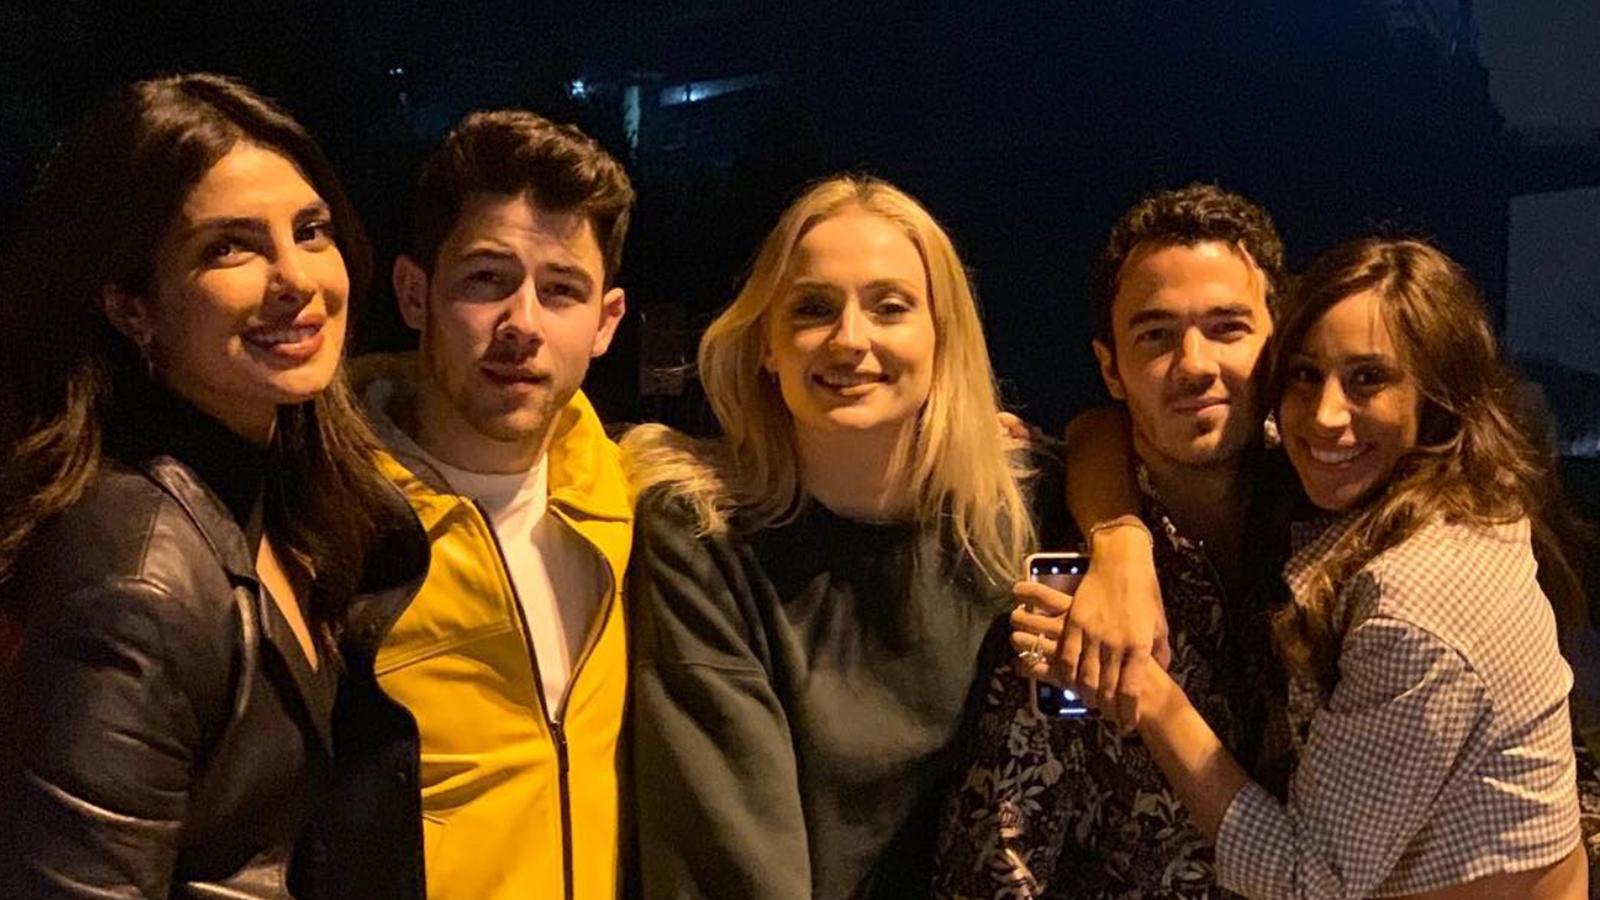 The Jonas Brothers & Their Ladies Crashed A College Bar